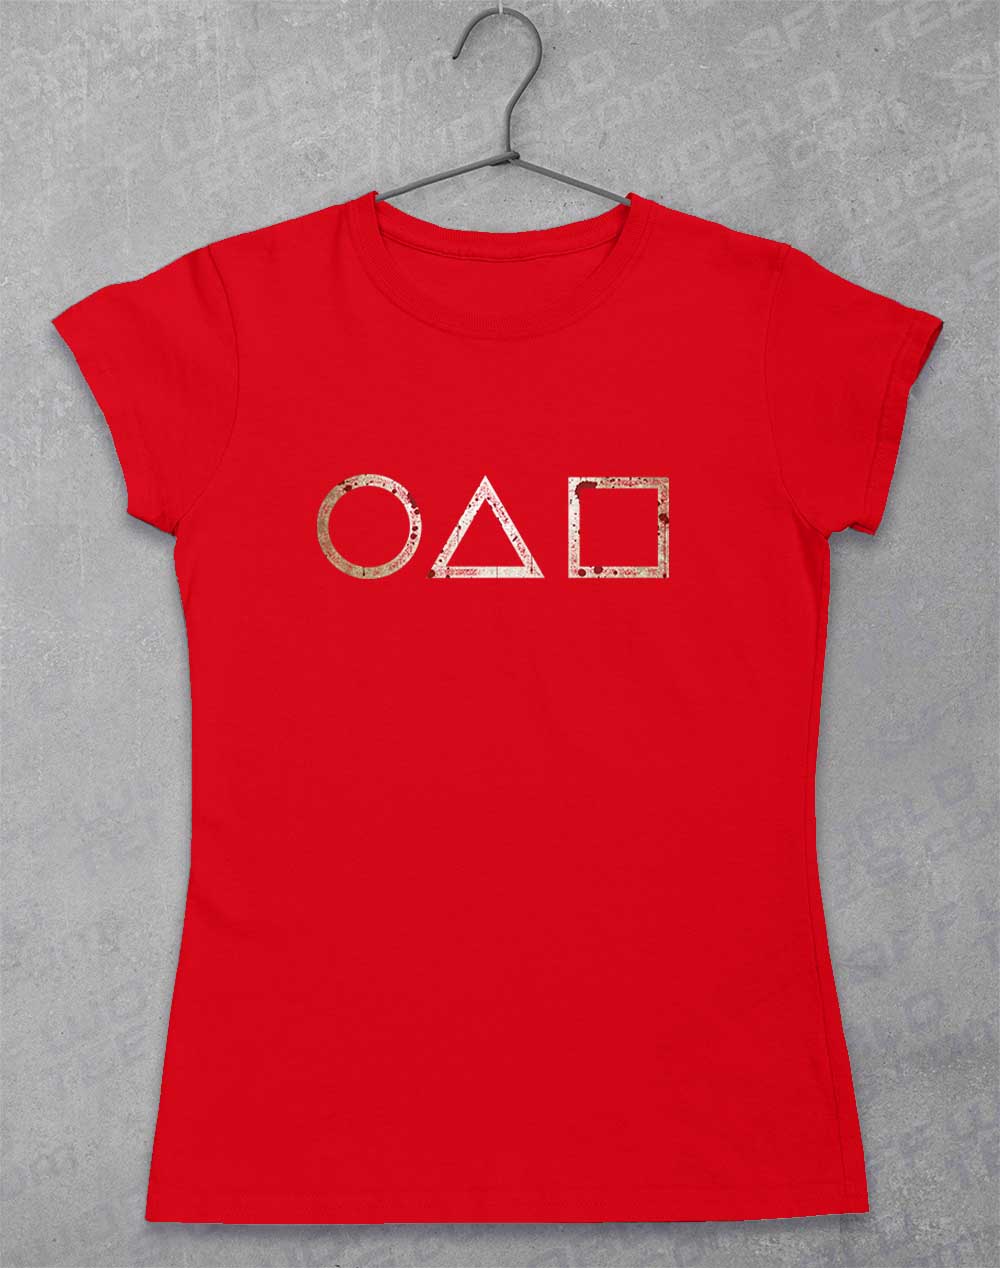 Red - Circle Triangle Square Women's T-Shirt